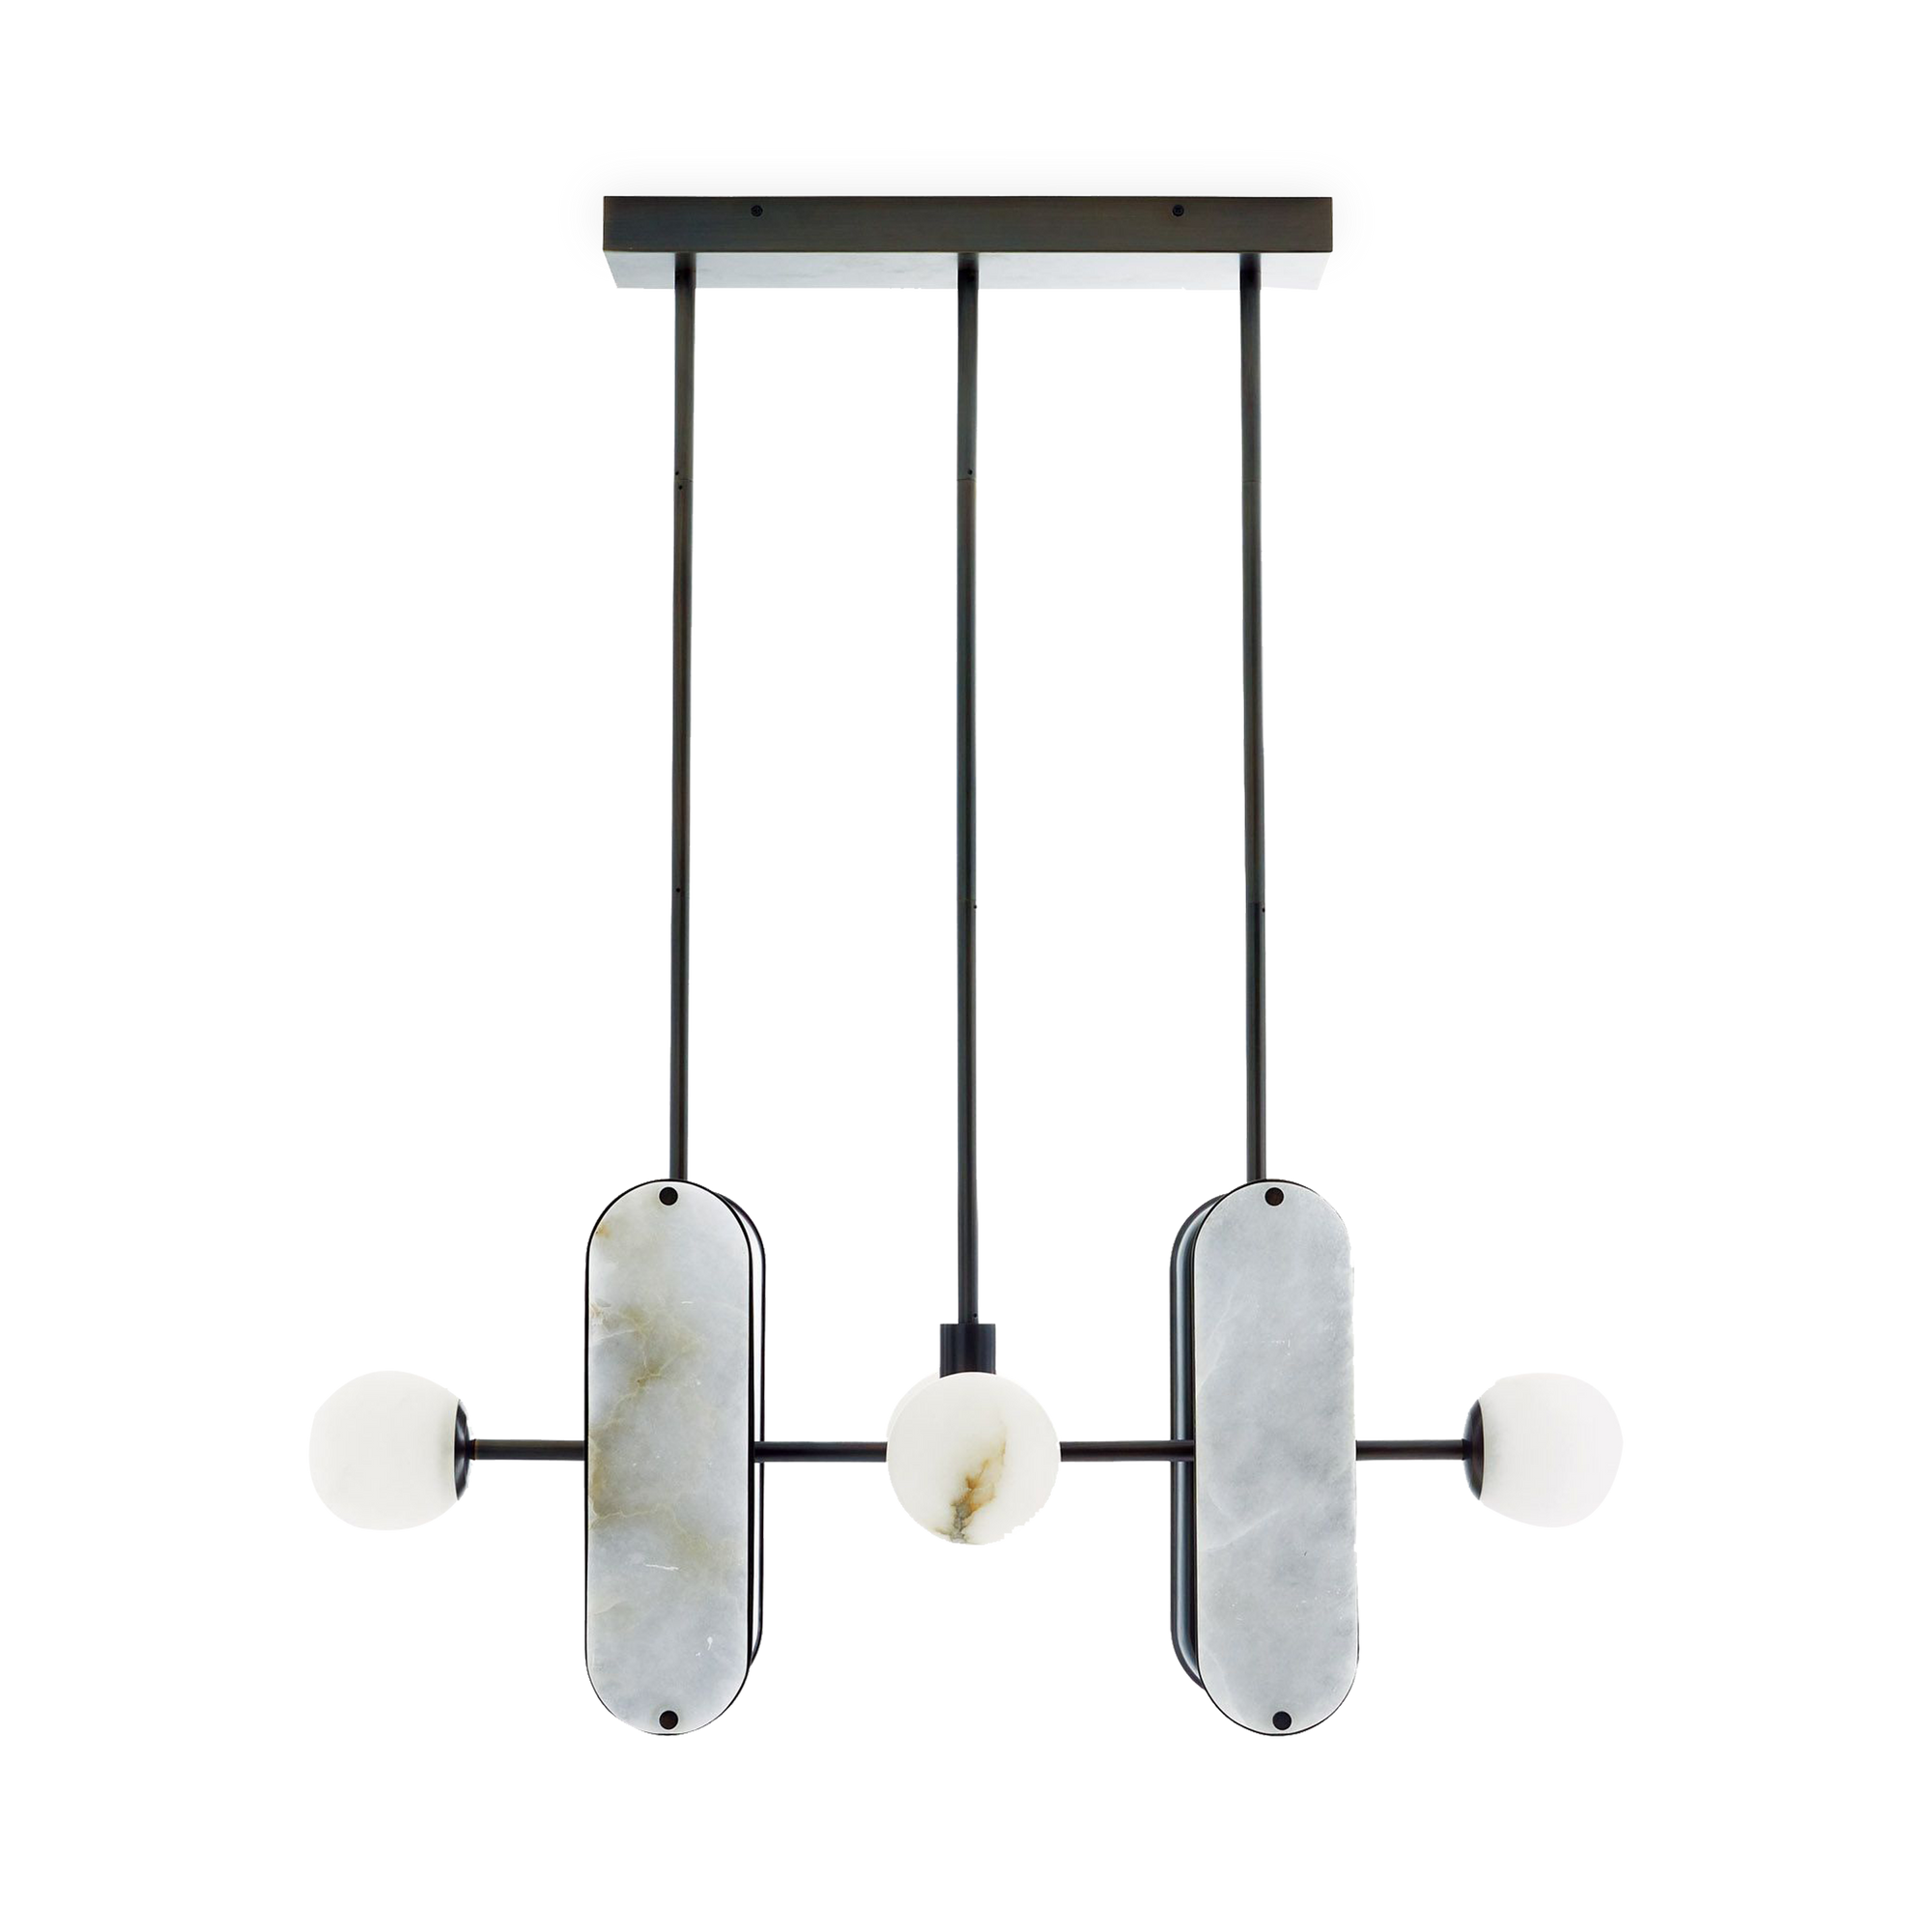 The Maradona Chandelier is styled in English bronze with an iron frame and white alabaster shades.